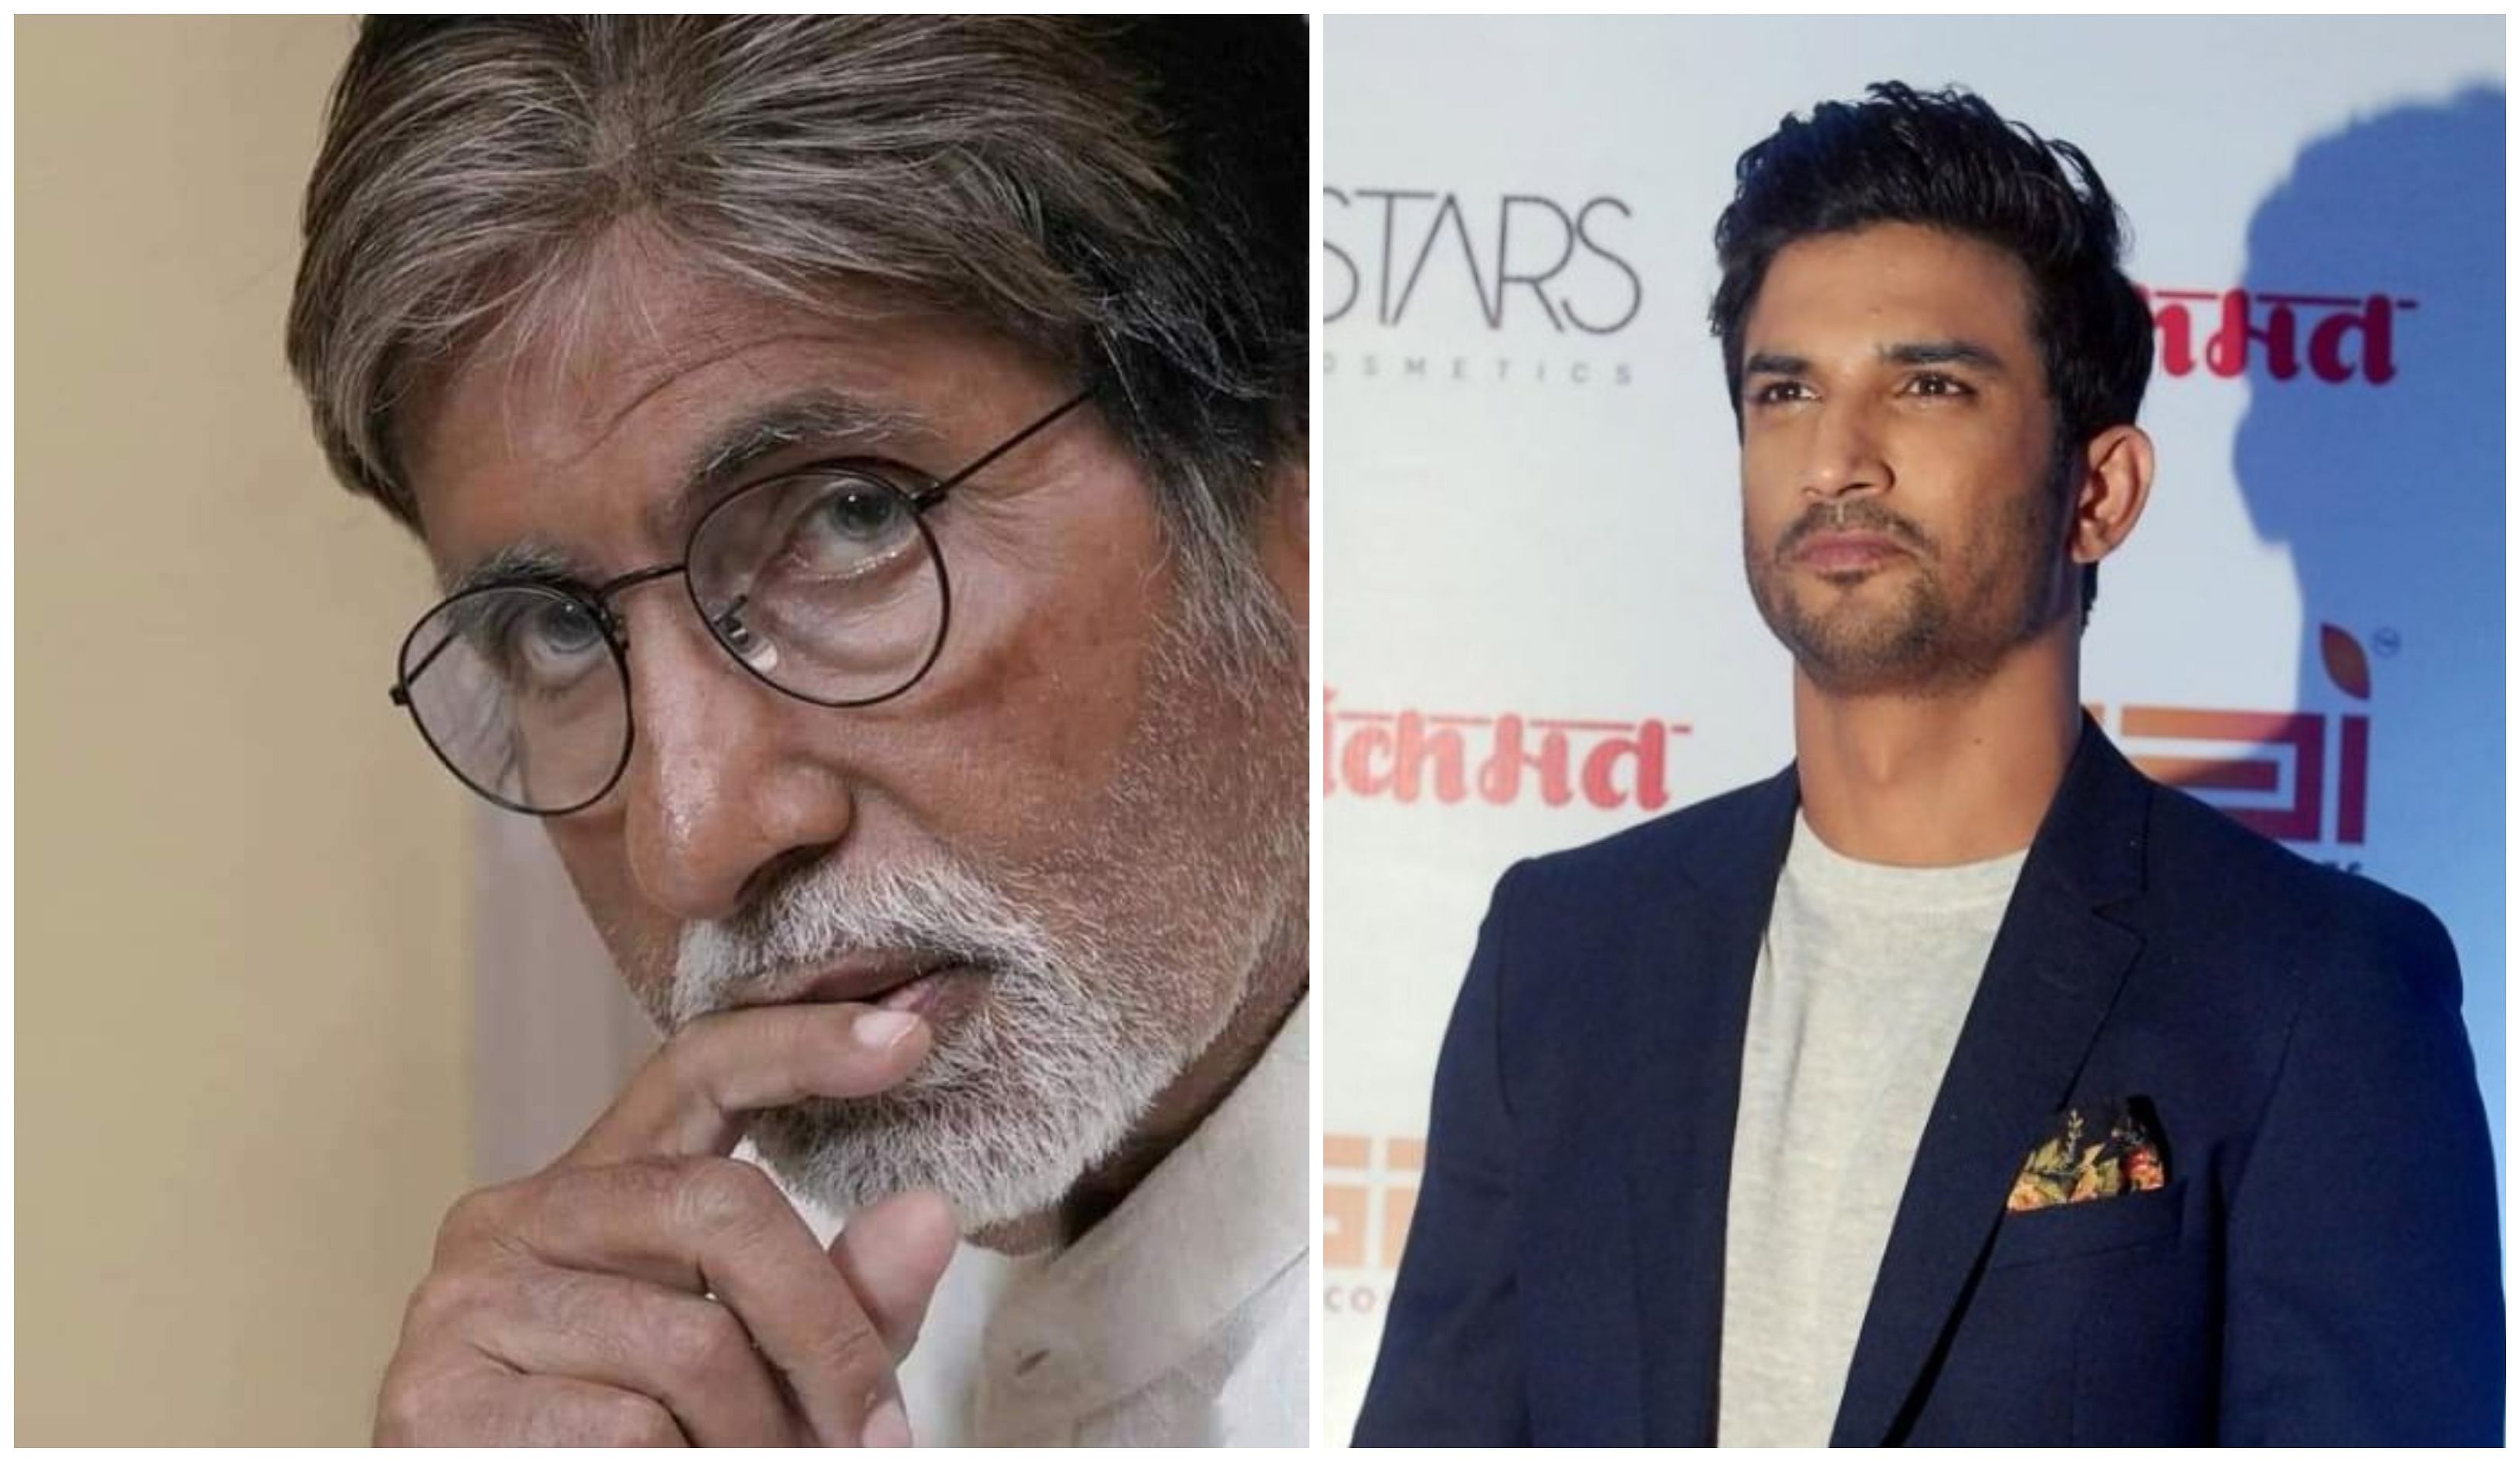 Amitabh Bachchan was moved by Sushant Singh Rajput's death. Credit: Facebook/File Photo